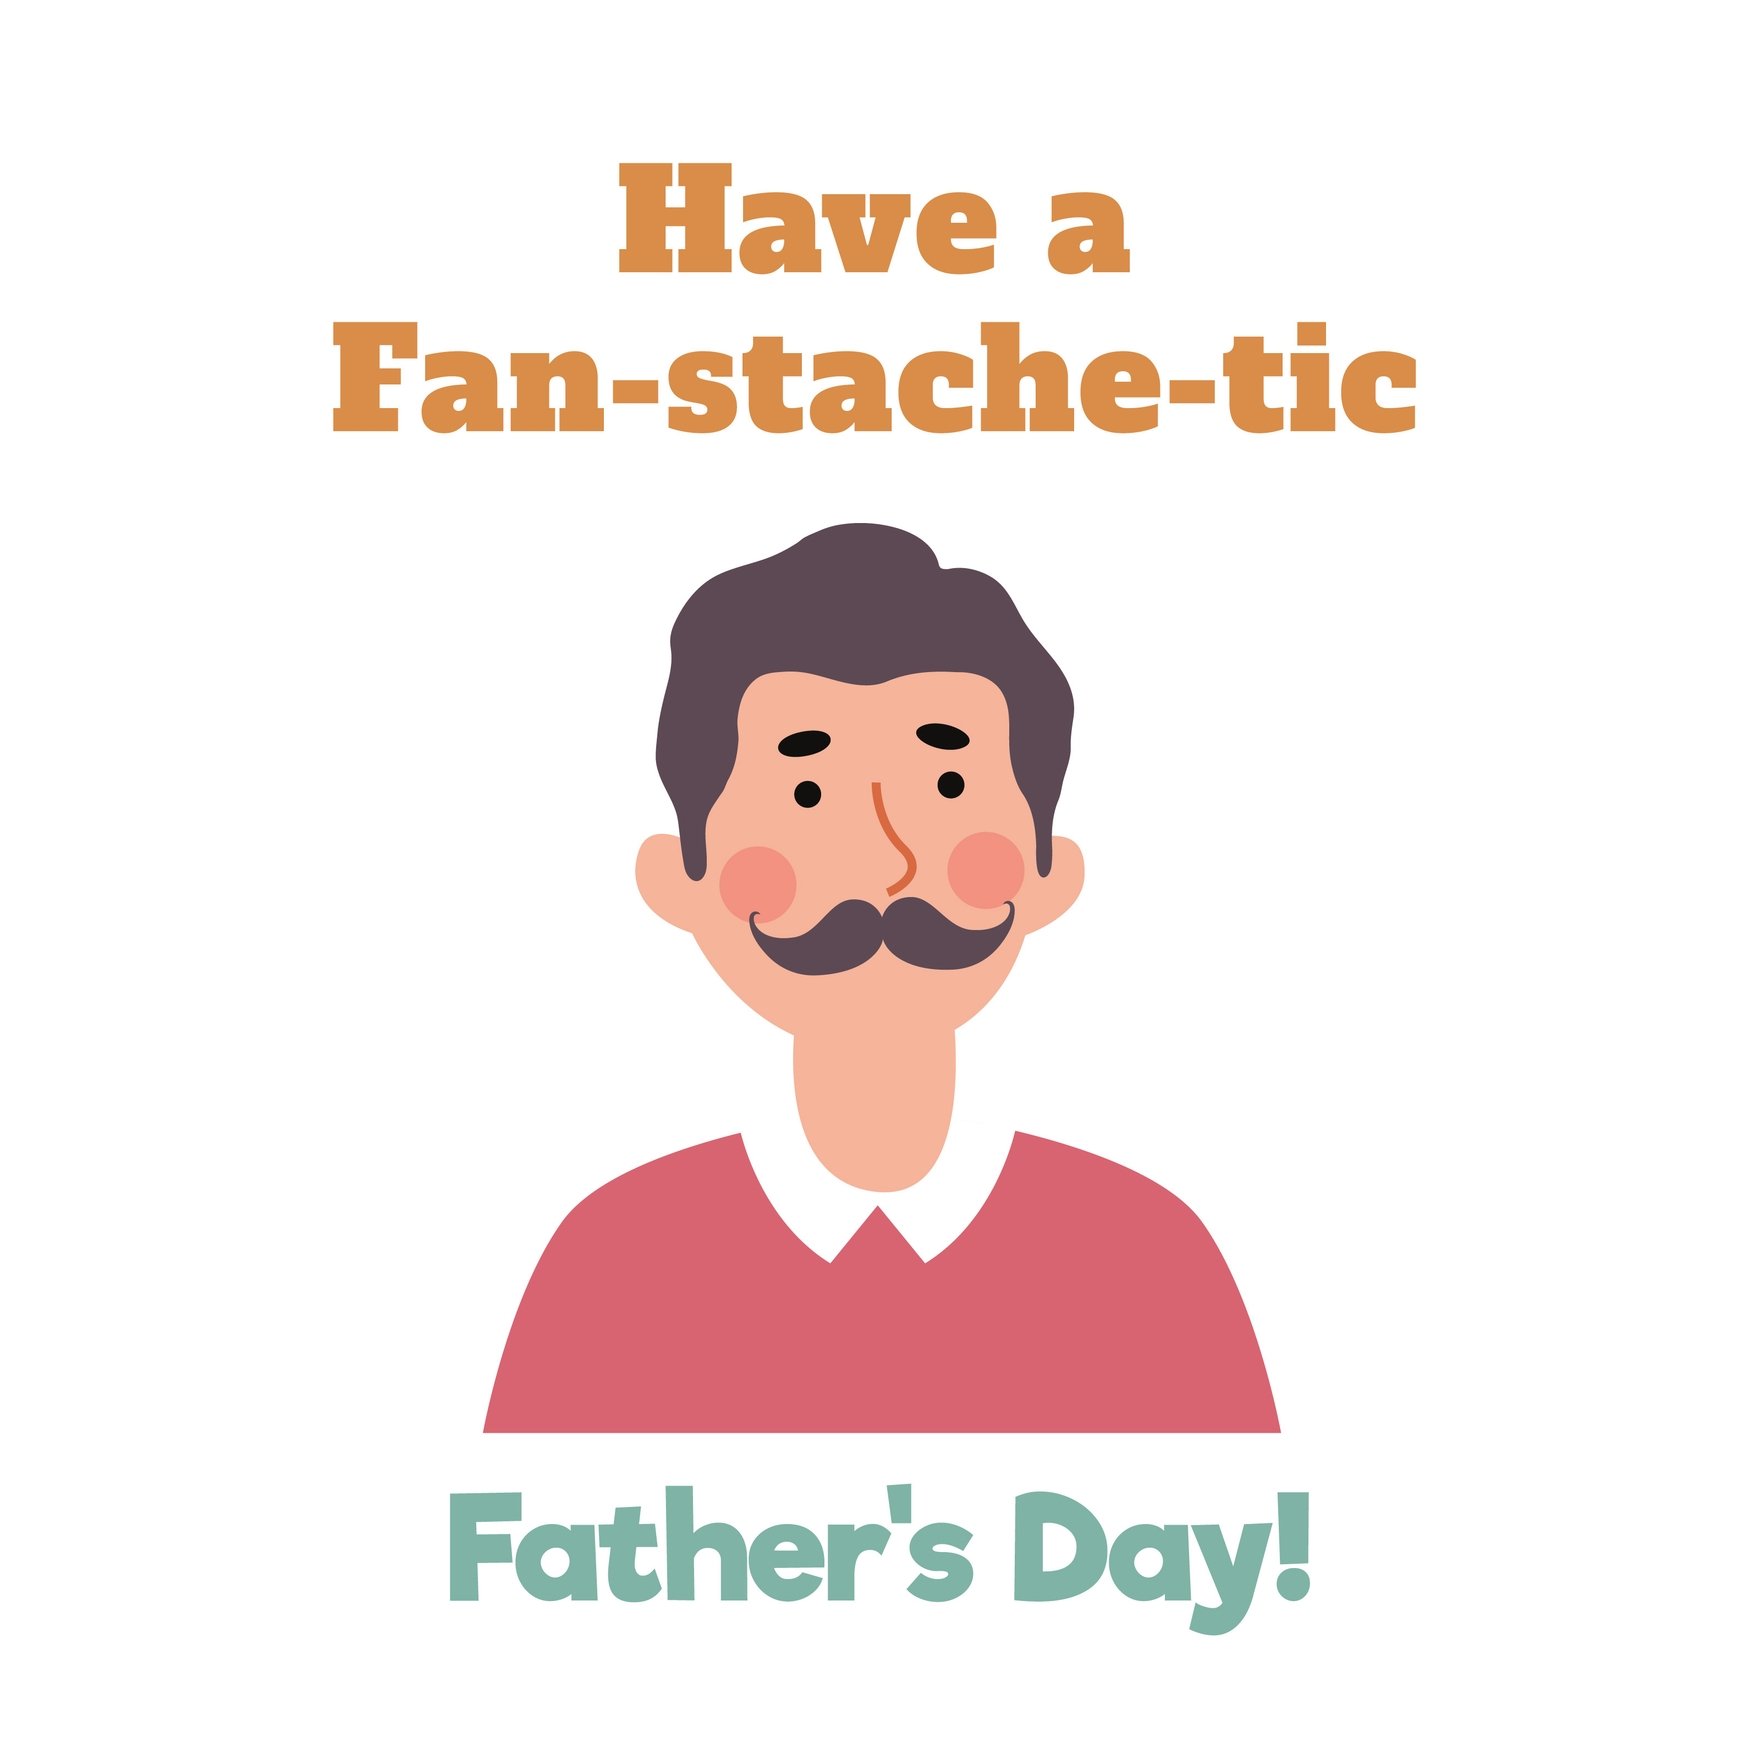 Free Funny Happy Father's Day Gif in Illustrator, EPS, SVG, JPG, GIF, PNG, After Effects